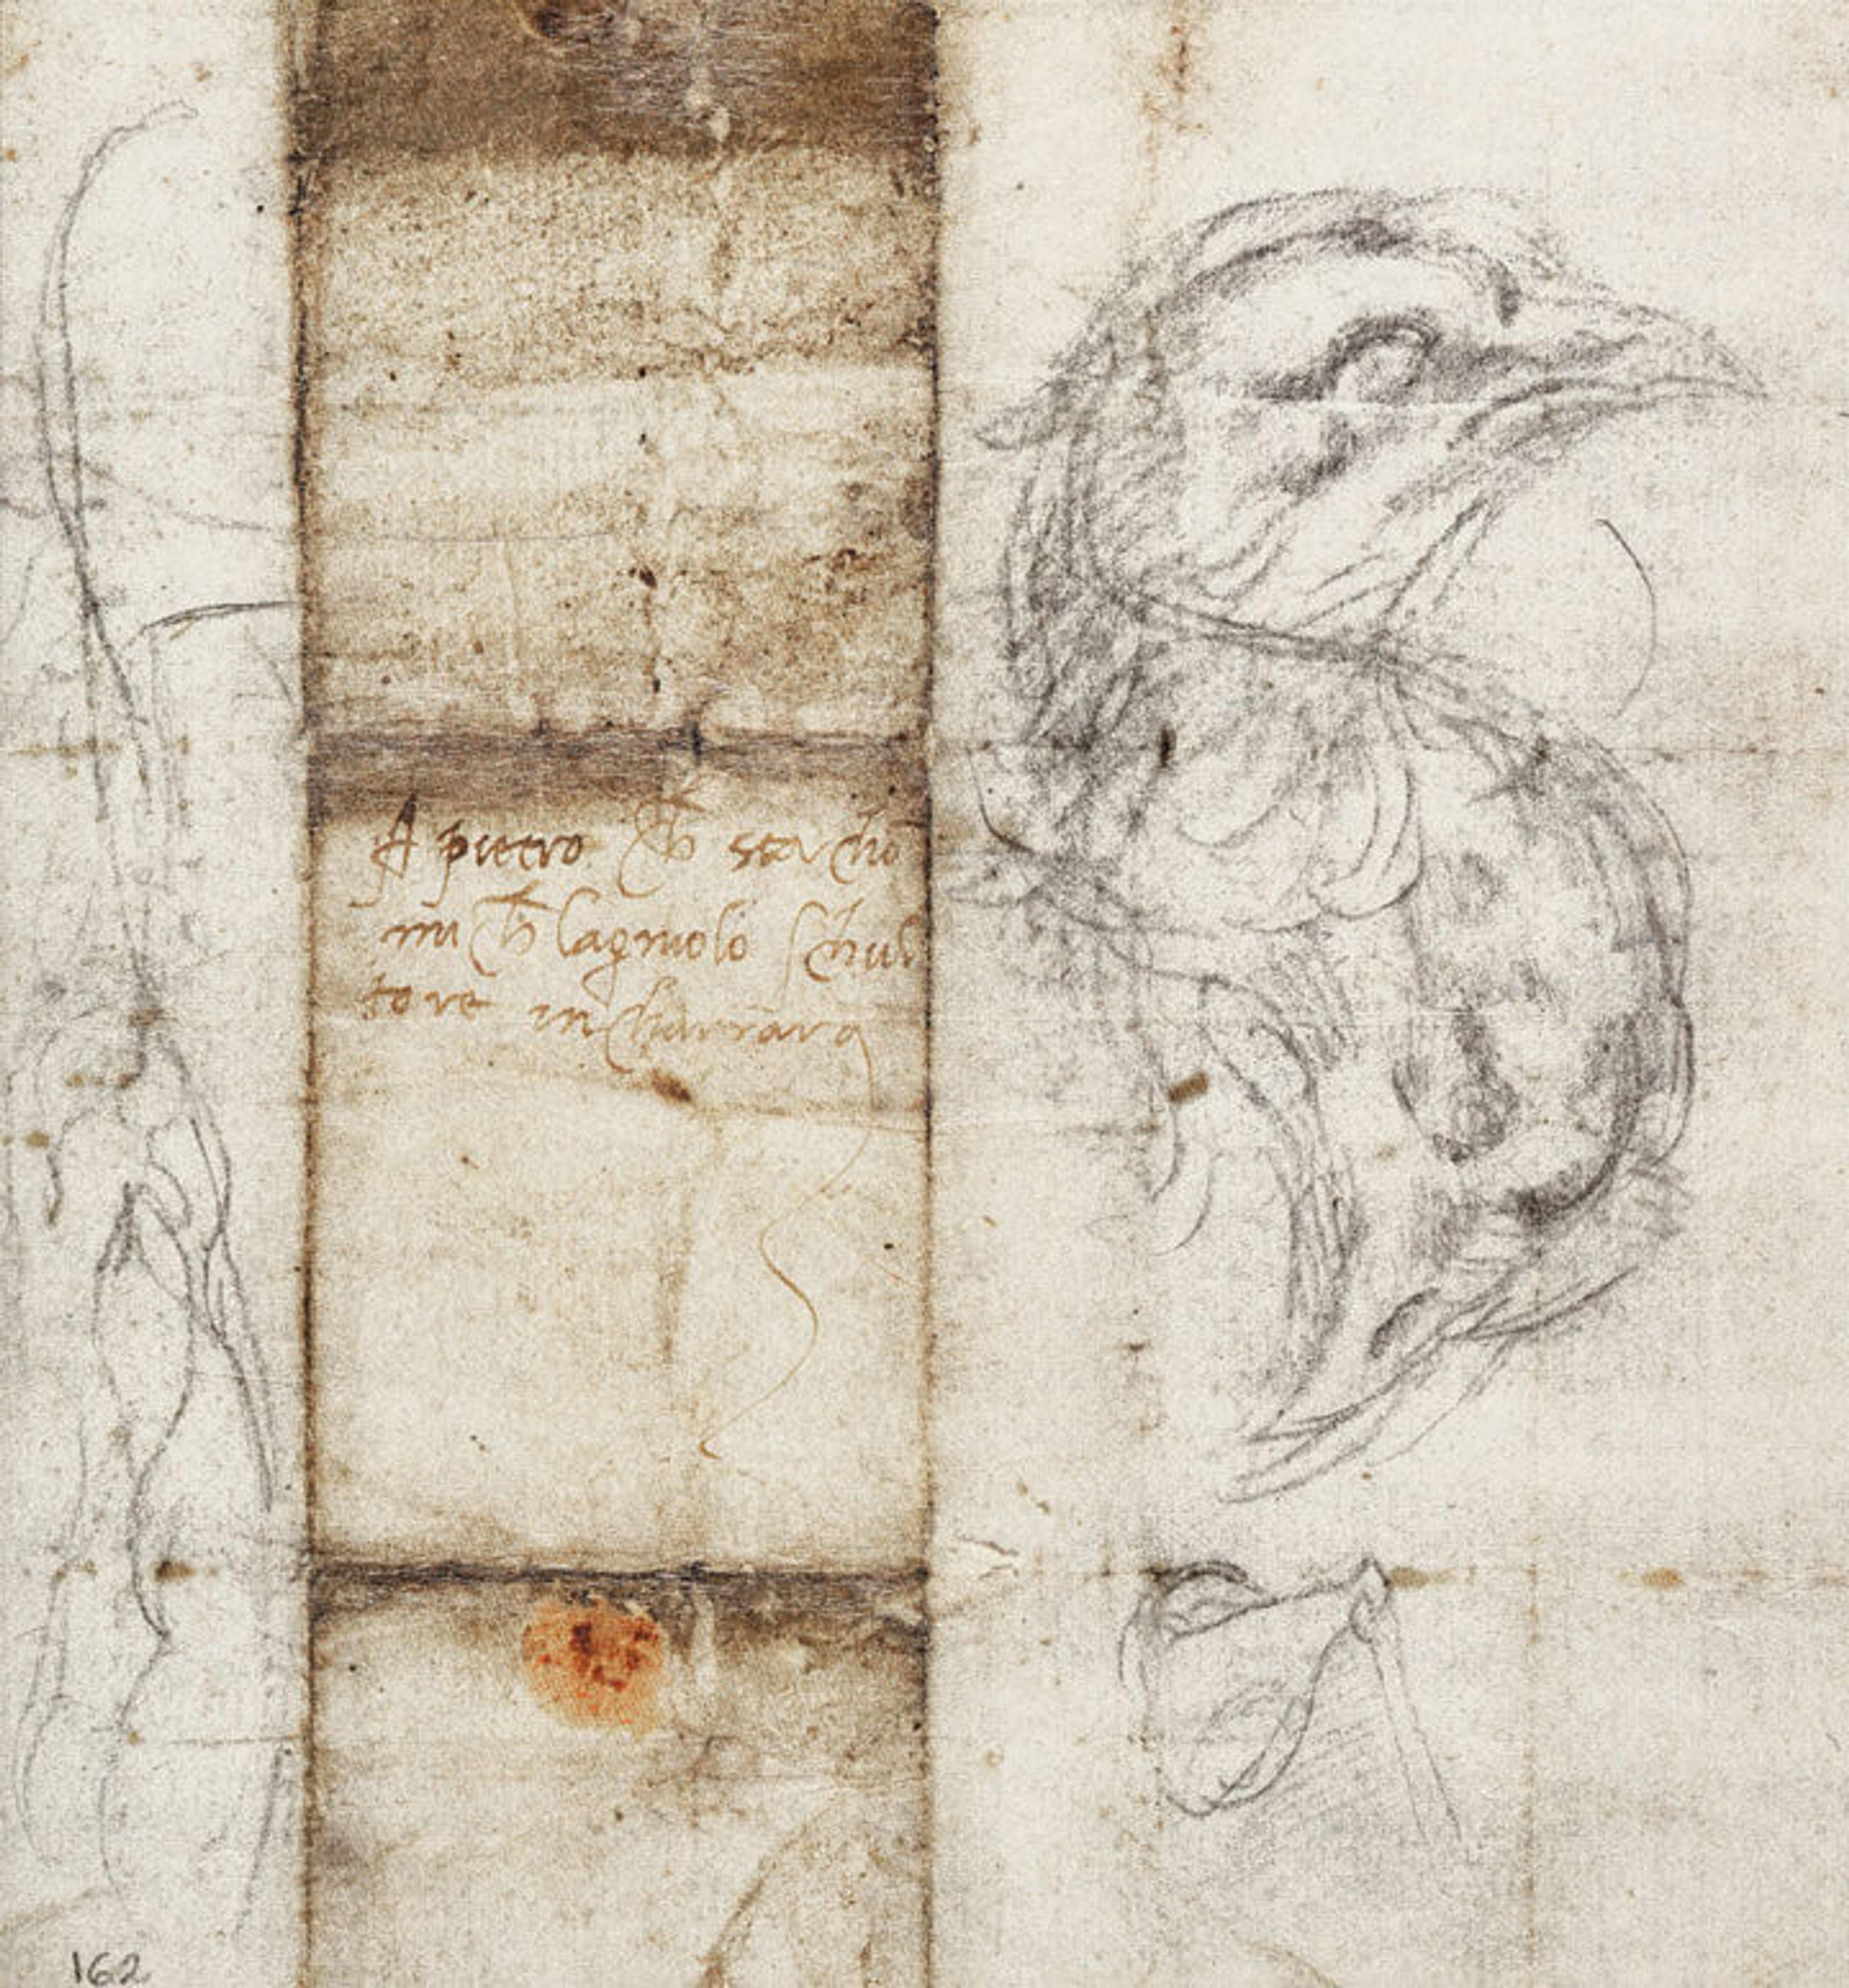 A letter Michelangelo wrote to Pietro Urbano on paper adorned with the artist's sketches of birds